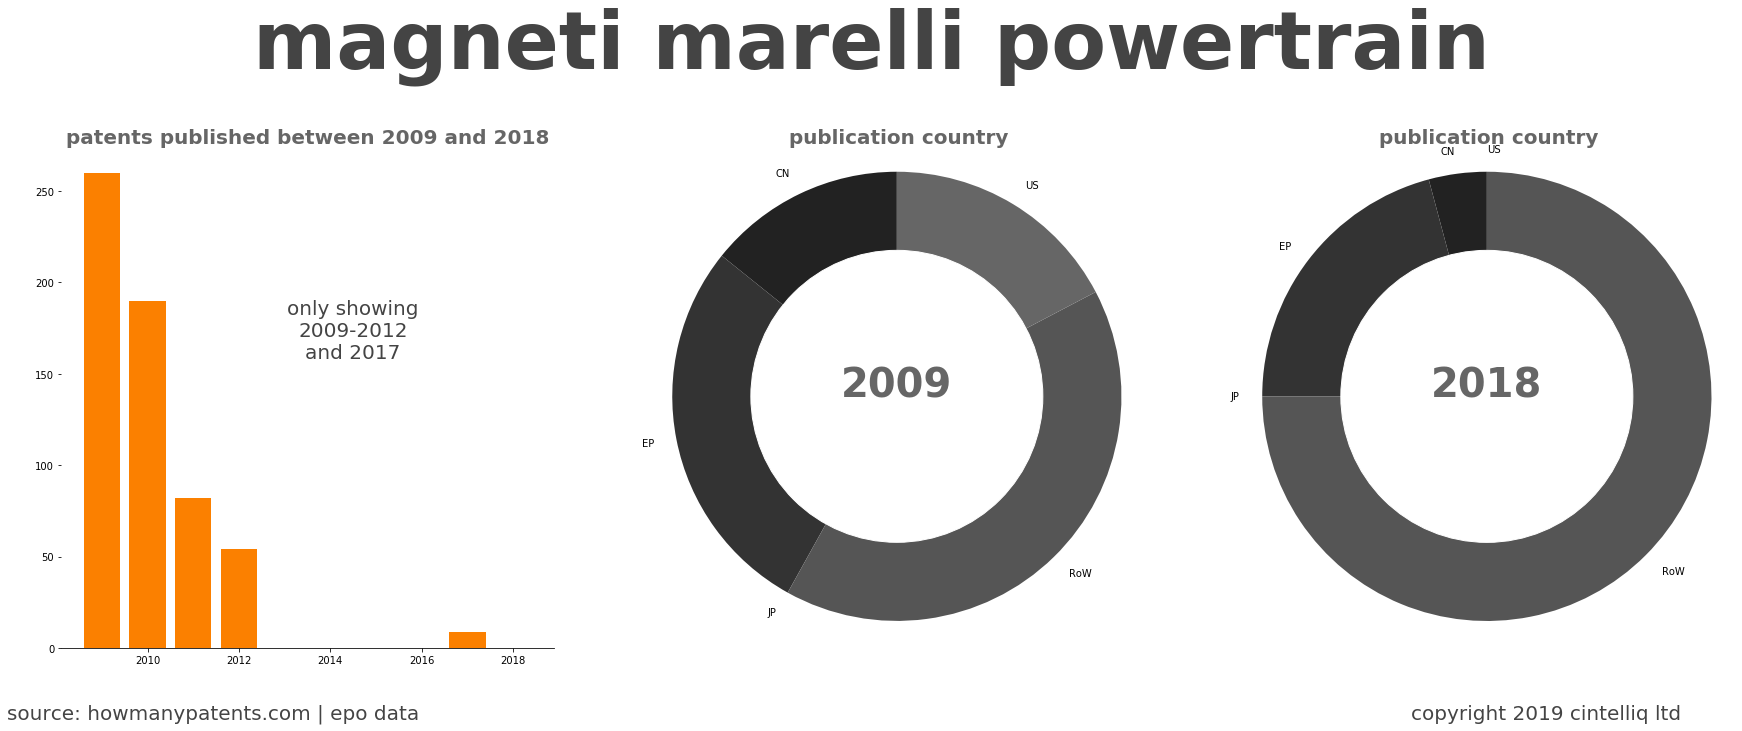 summary of patents for Magneti Marelli Powertrain